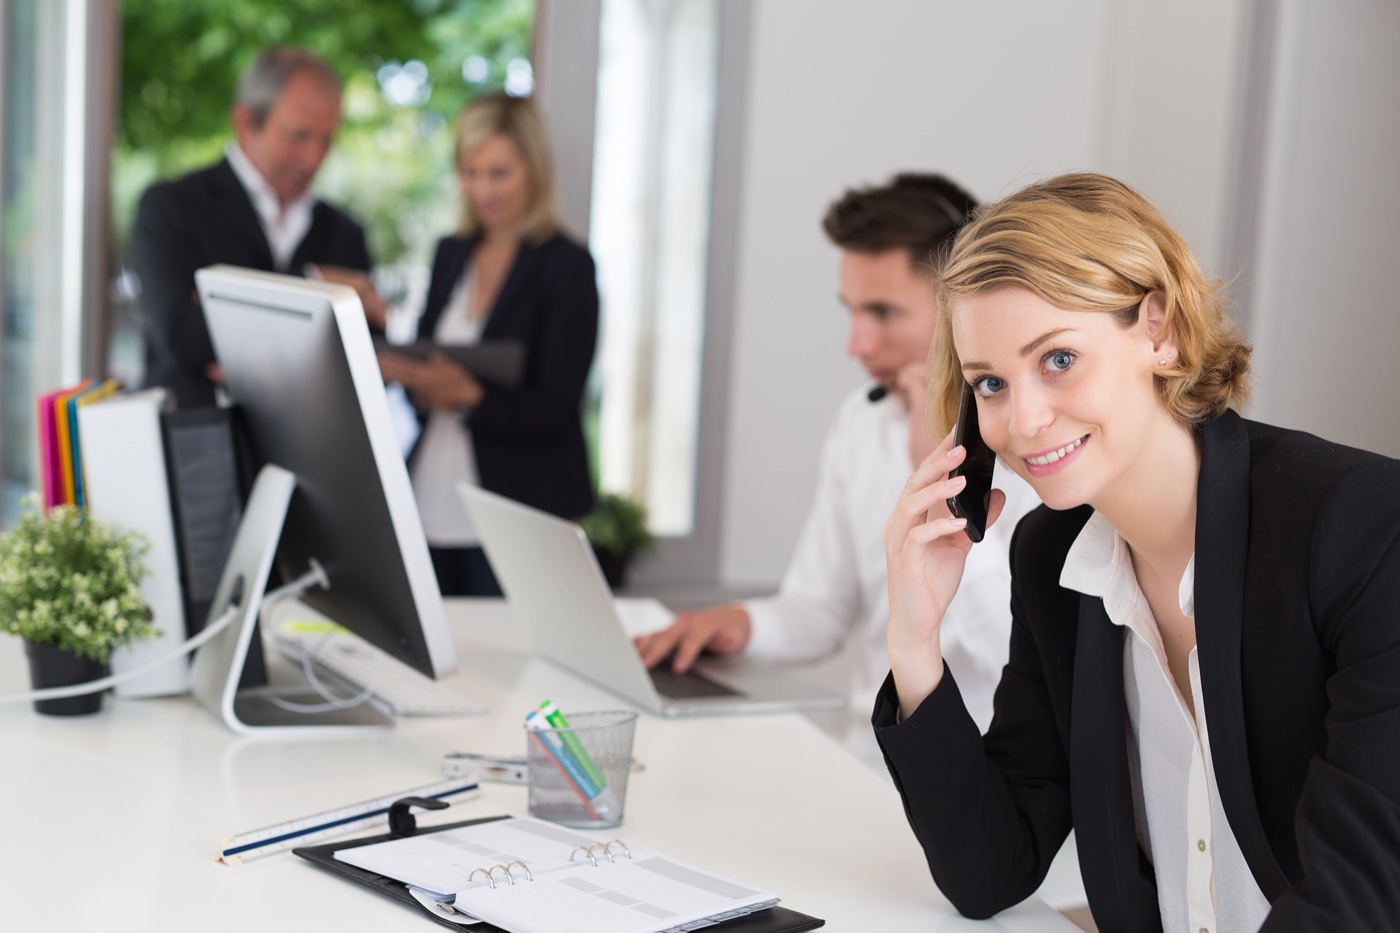 Woman on phone in office setting enrolling online